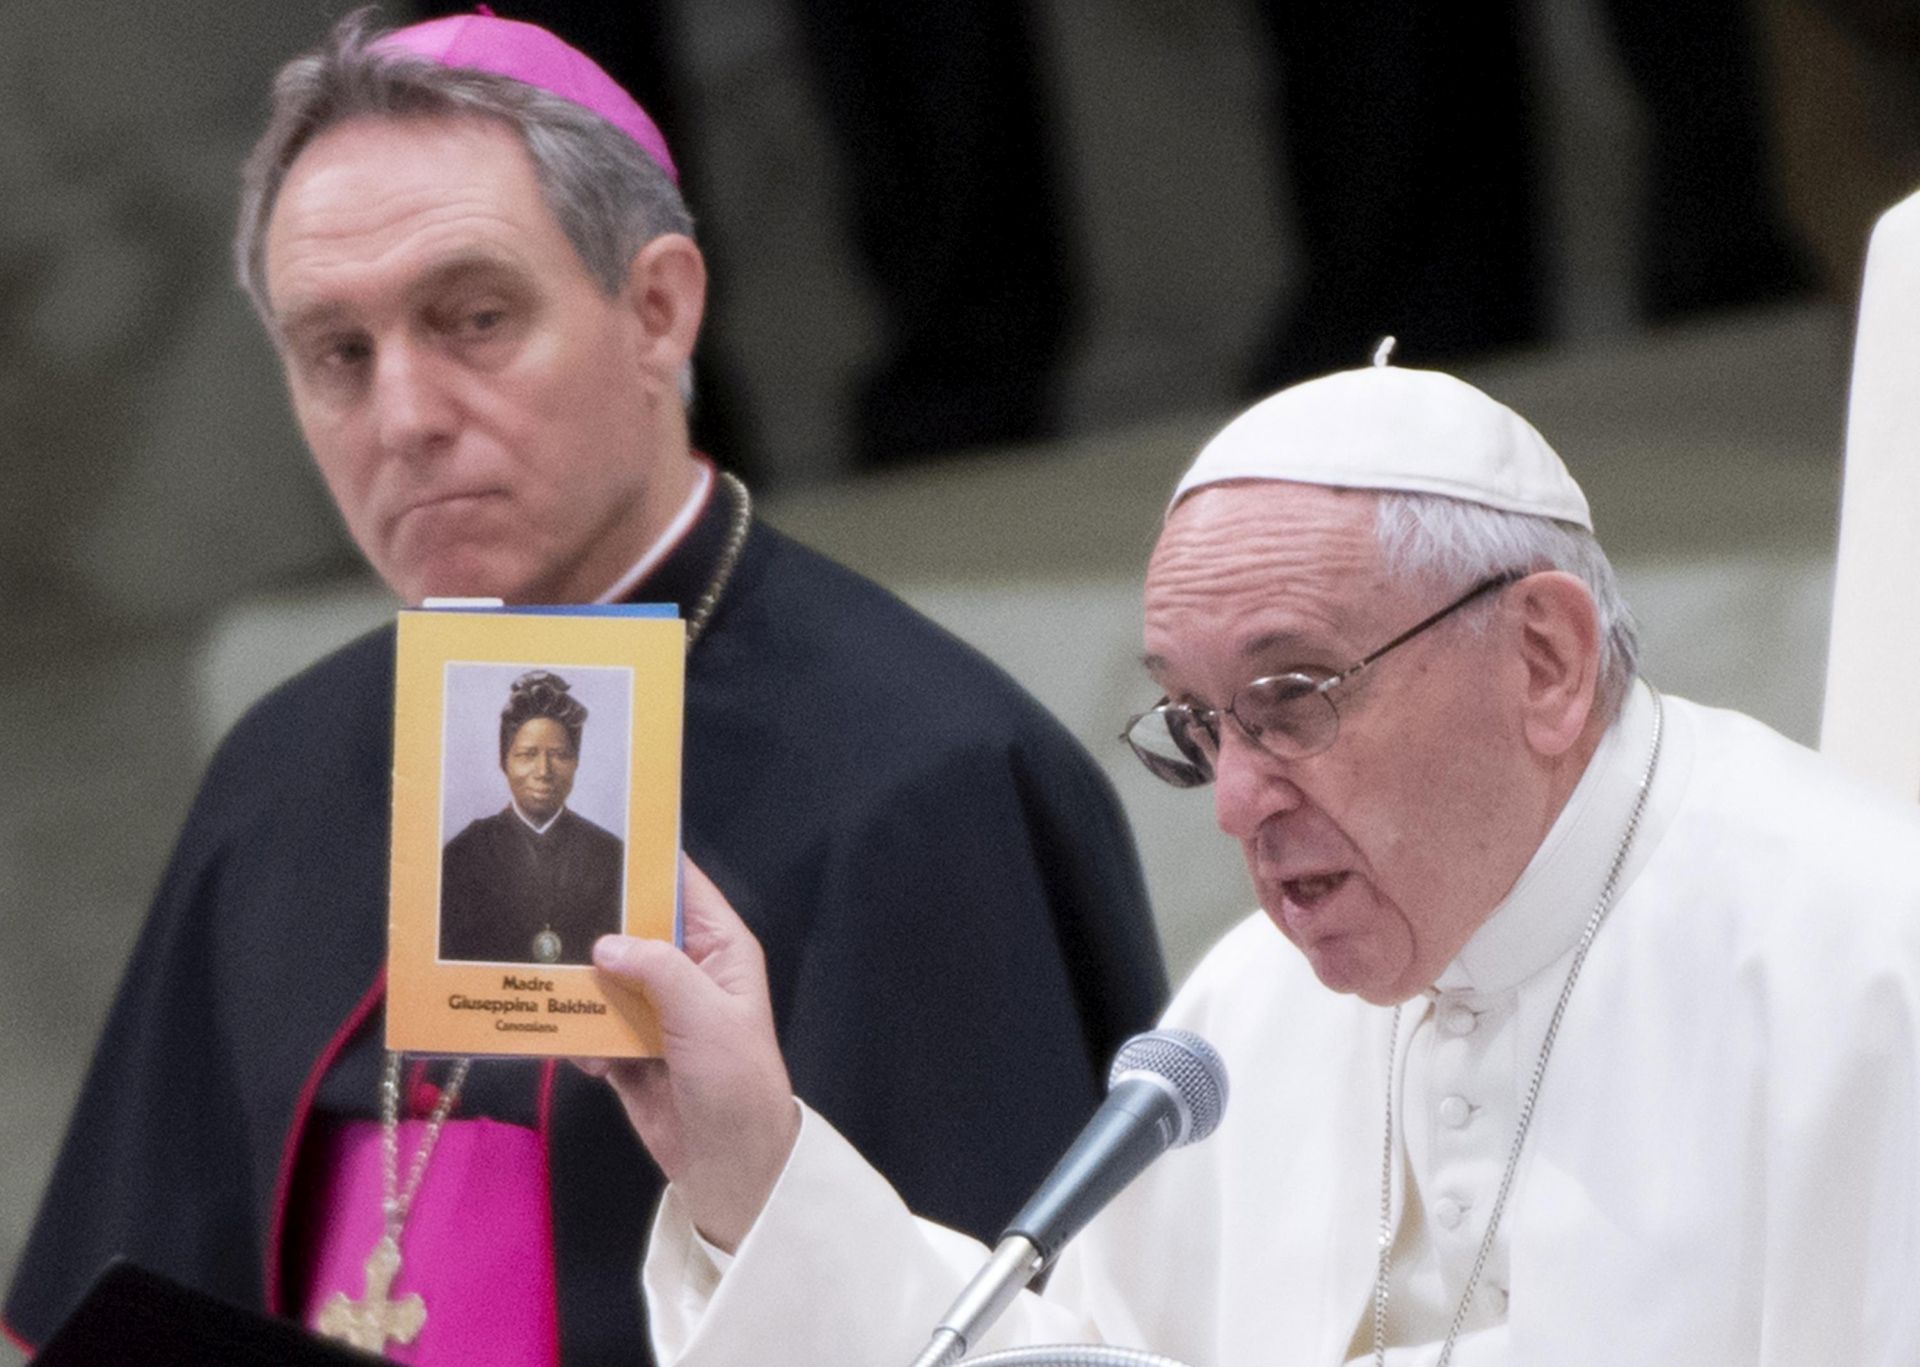 epa05777714 Pope Francis holds up an image of Saint Josephine Bakhita on the day of her Feast during his weekly Wednesday General Audience in Nervi Hall at the Vatican, 8 February 2017.  Born around 1869 in the Darfur region of Sudan, she was kidnapped by Arab slave traders sometime in February 1877. For over 12 years she was bought, sold and given away over a dozen times.  EPA/ANSA/CLAUDIO PERI